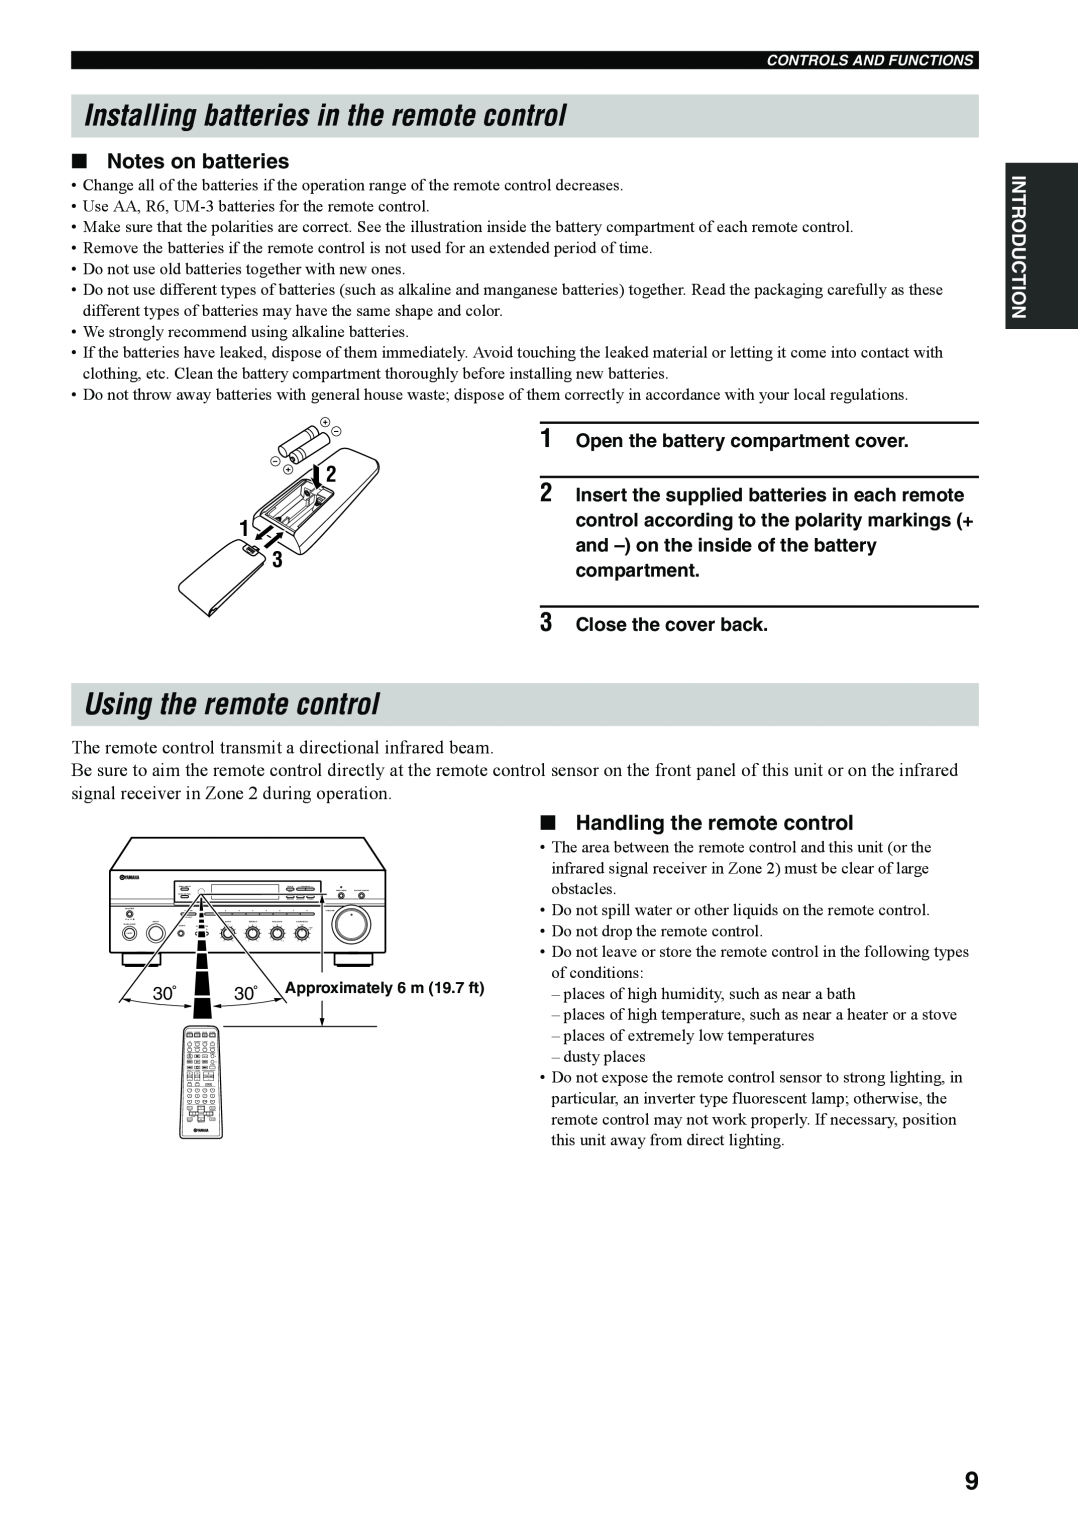 Yamaha RX-497 owner manual Installing batteries in the remote control, Using the remote control, Notes on batteries 